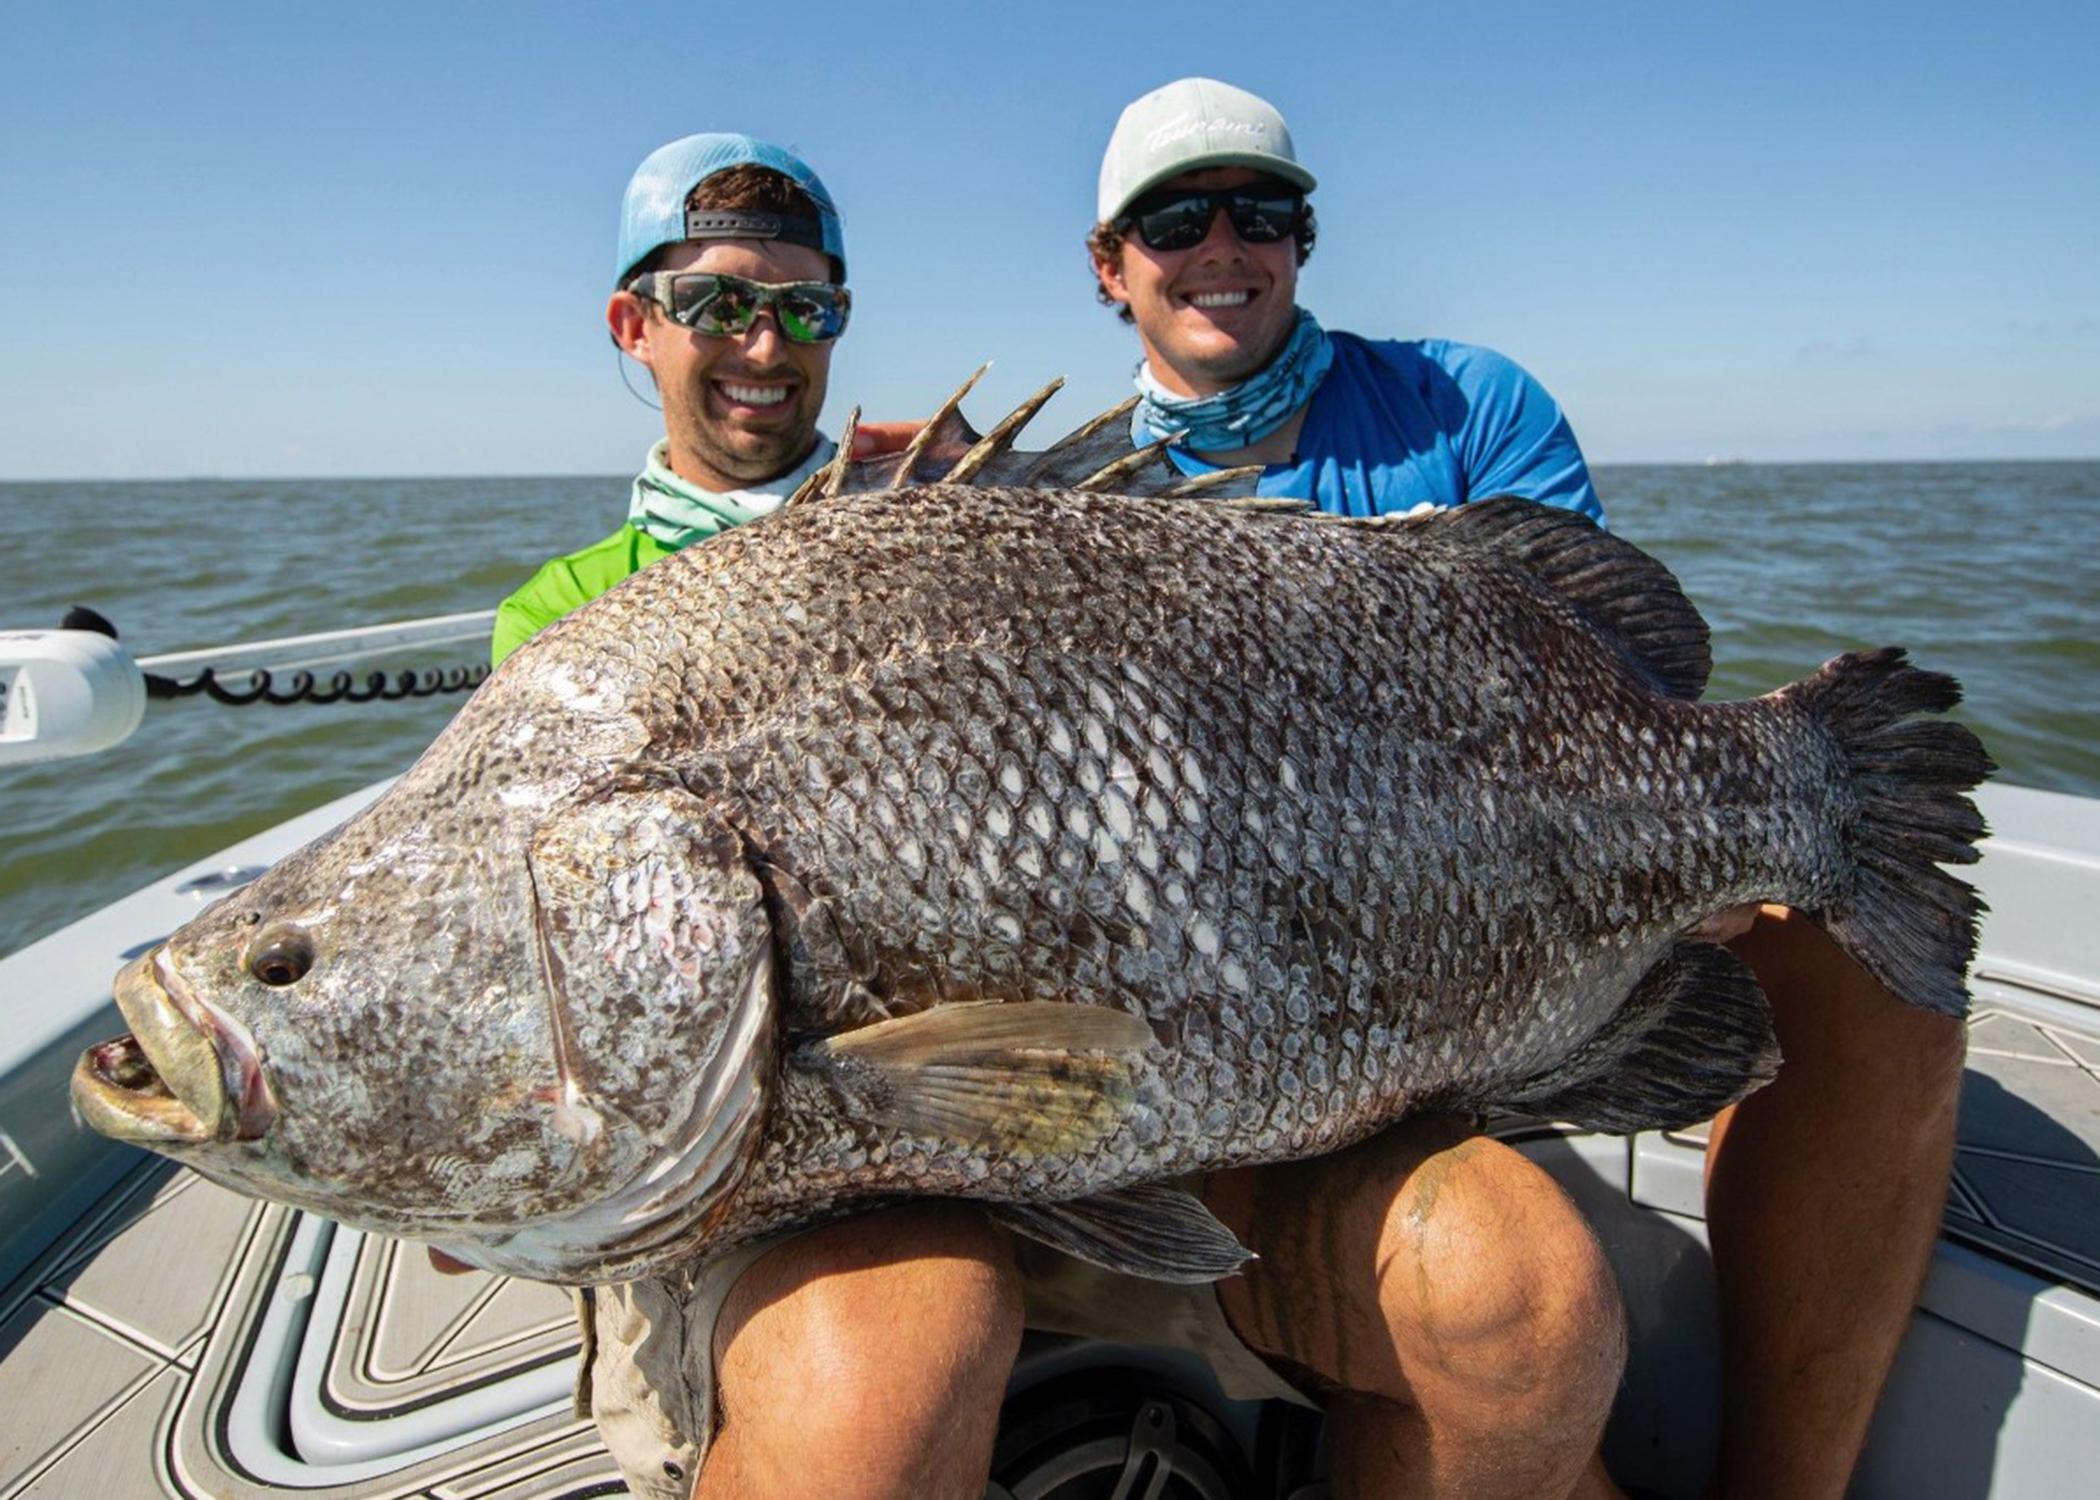 Two men in a boat pose with a large fish in their laps.